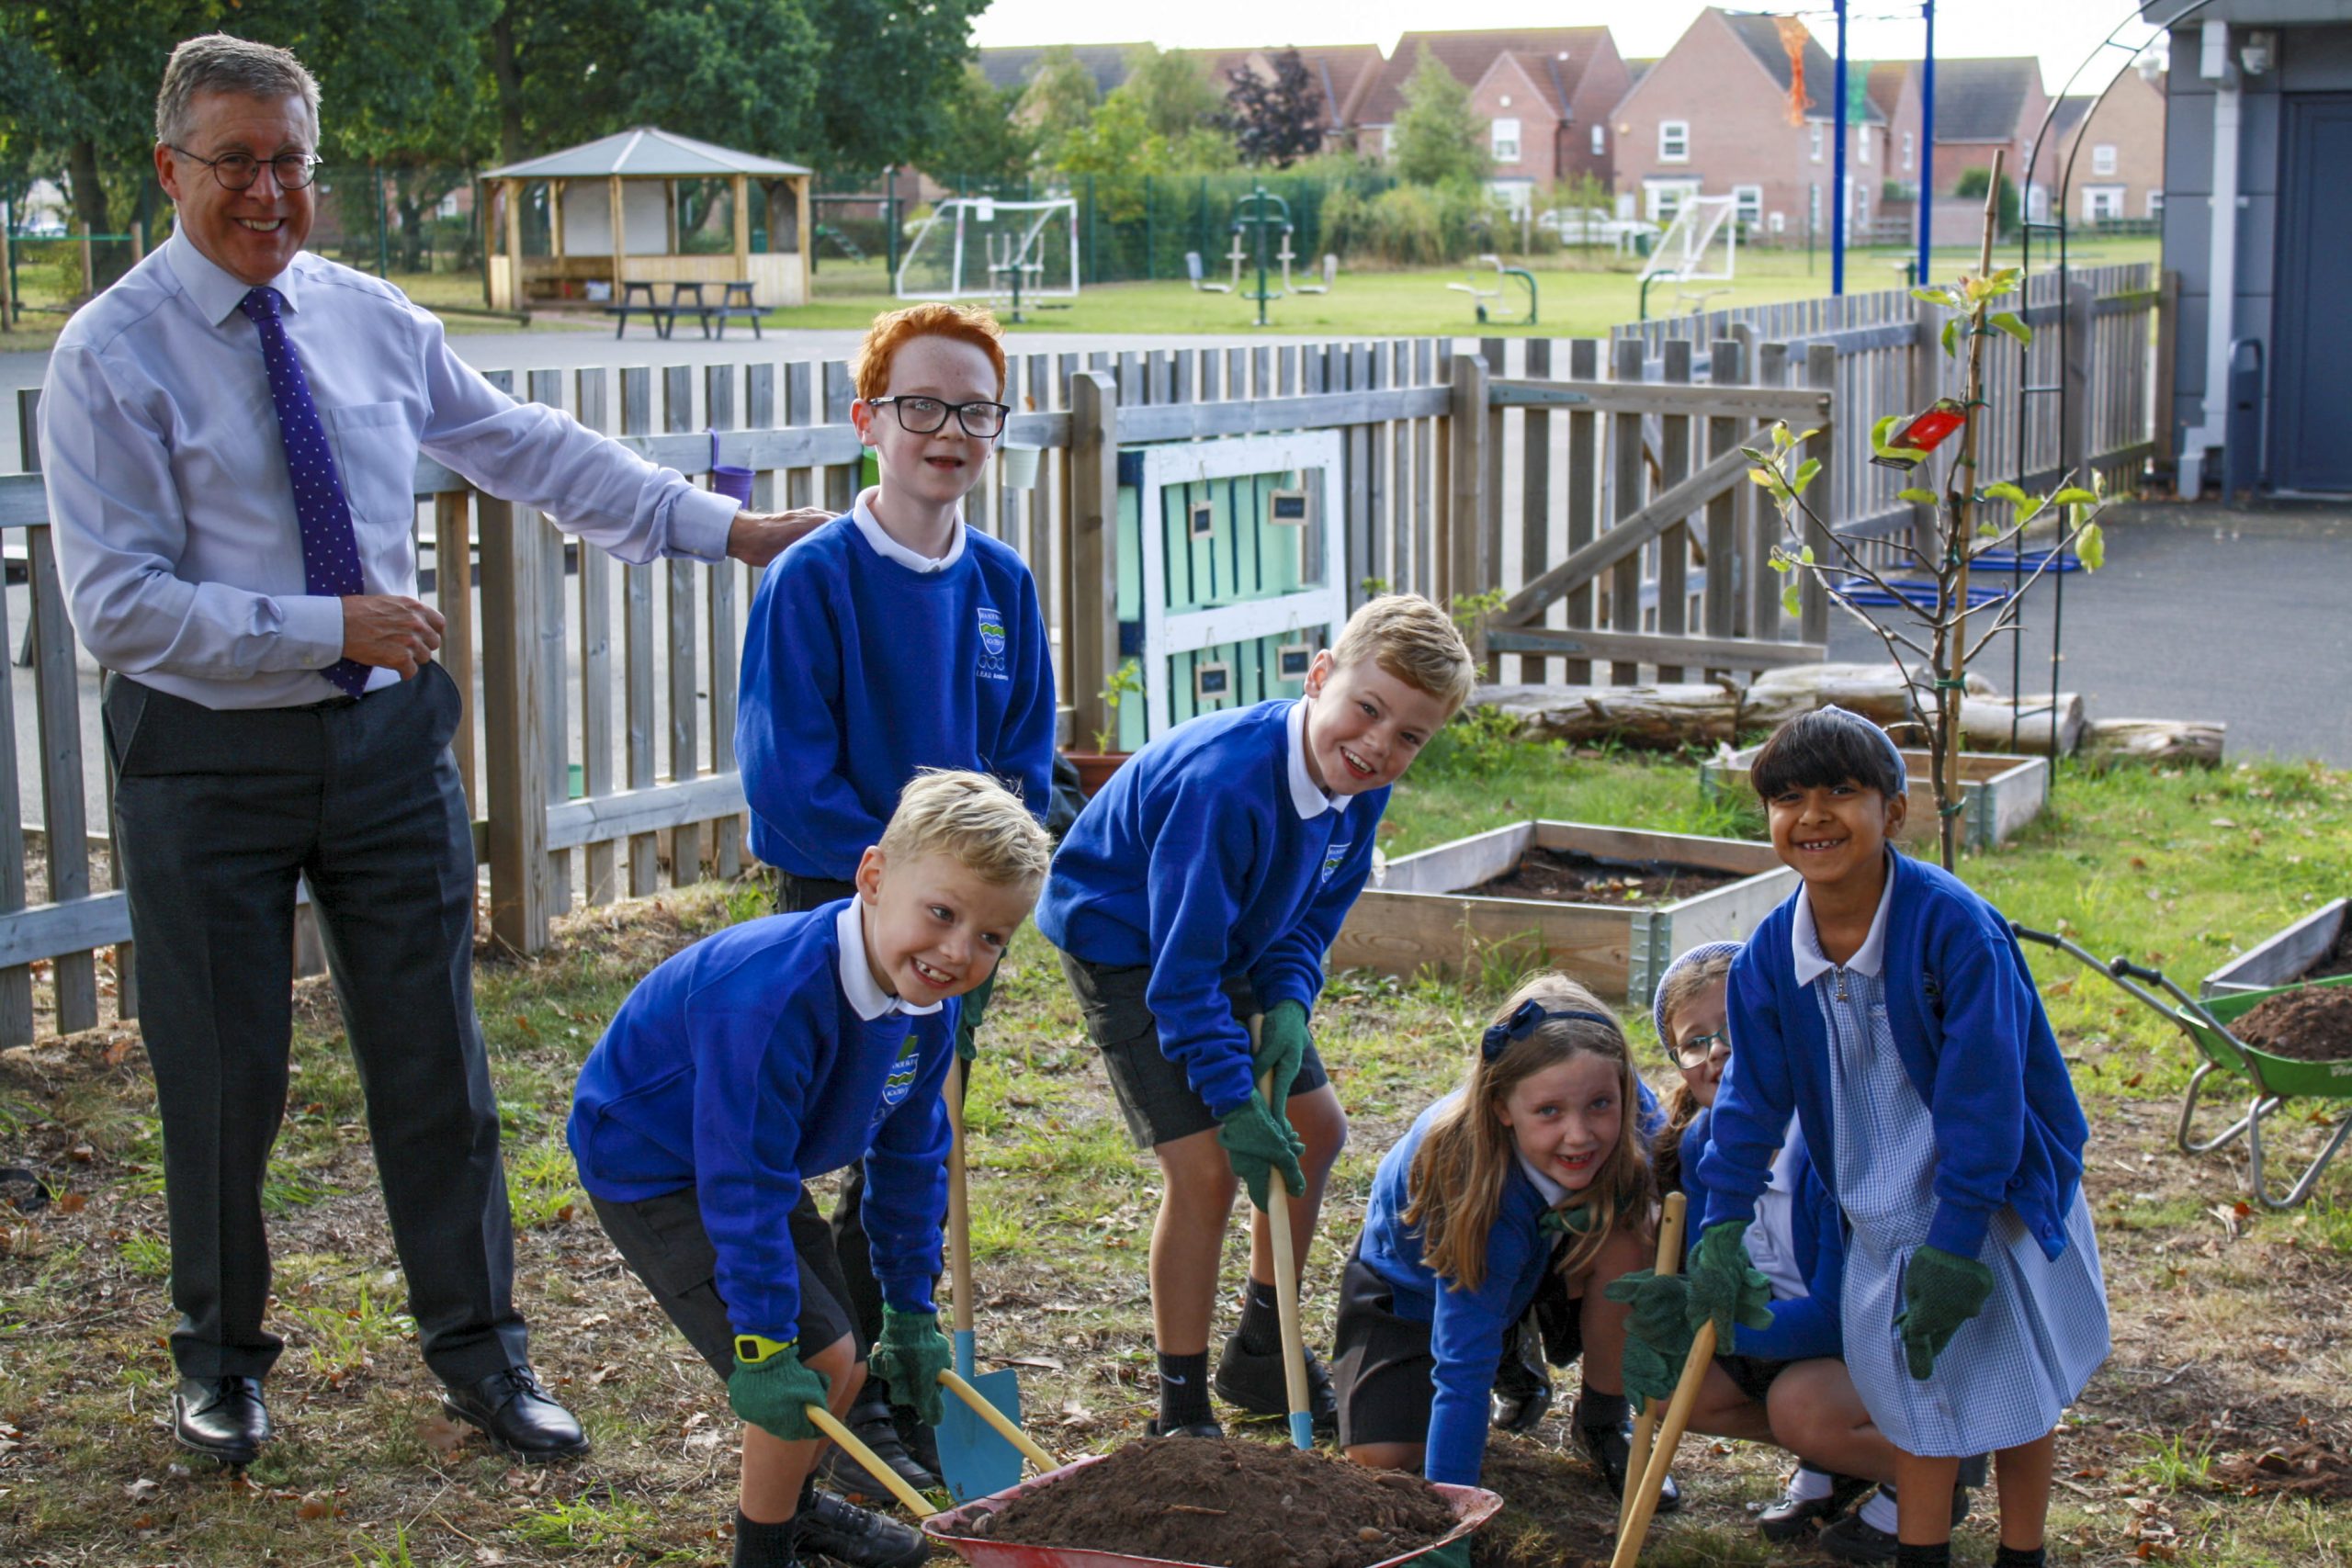 Lindum donates trees to schools as part of Great Big Green Week